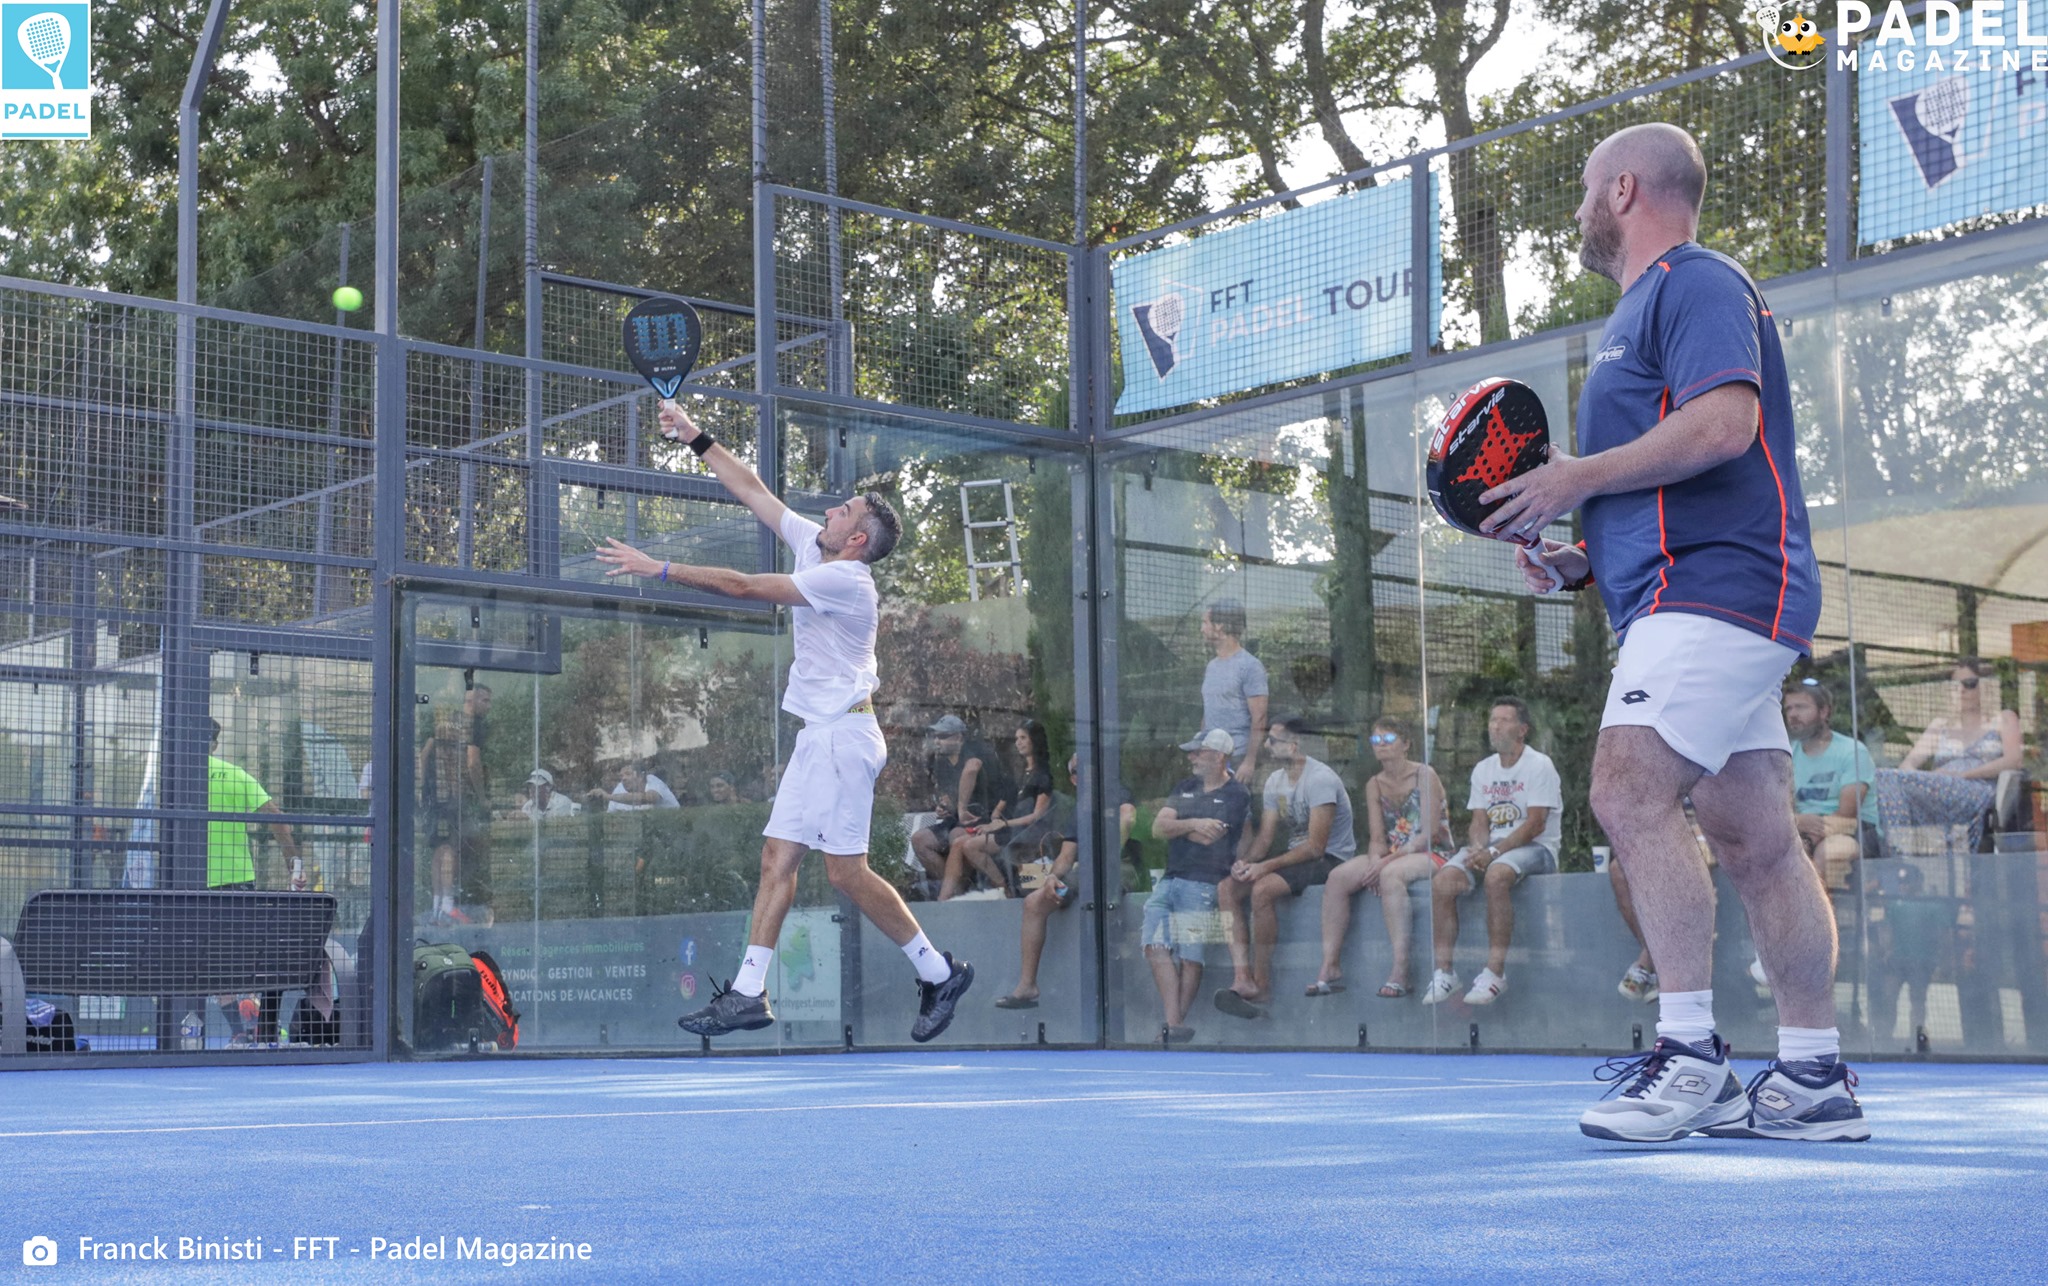 Results of the regional championships padel 2021